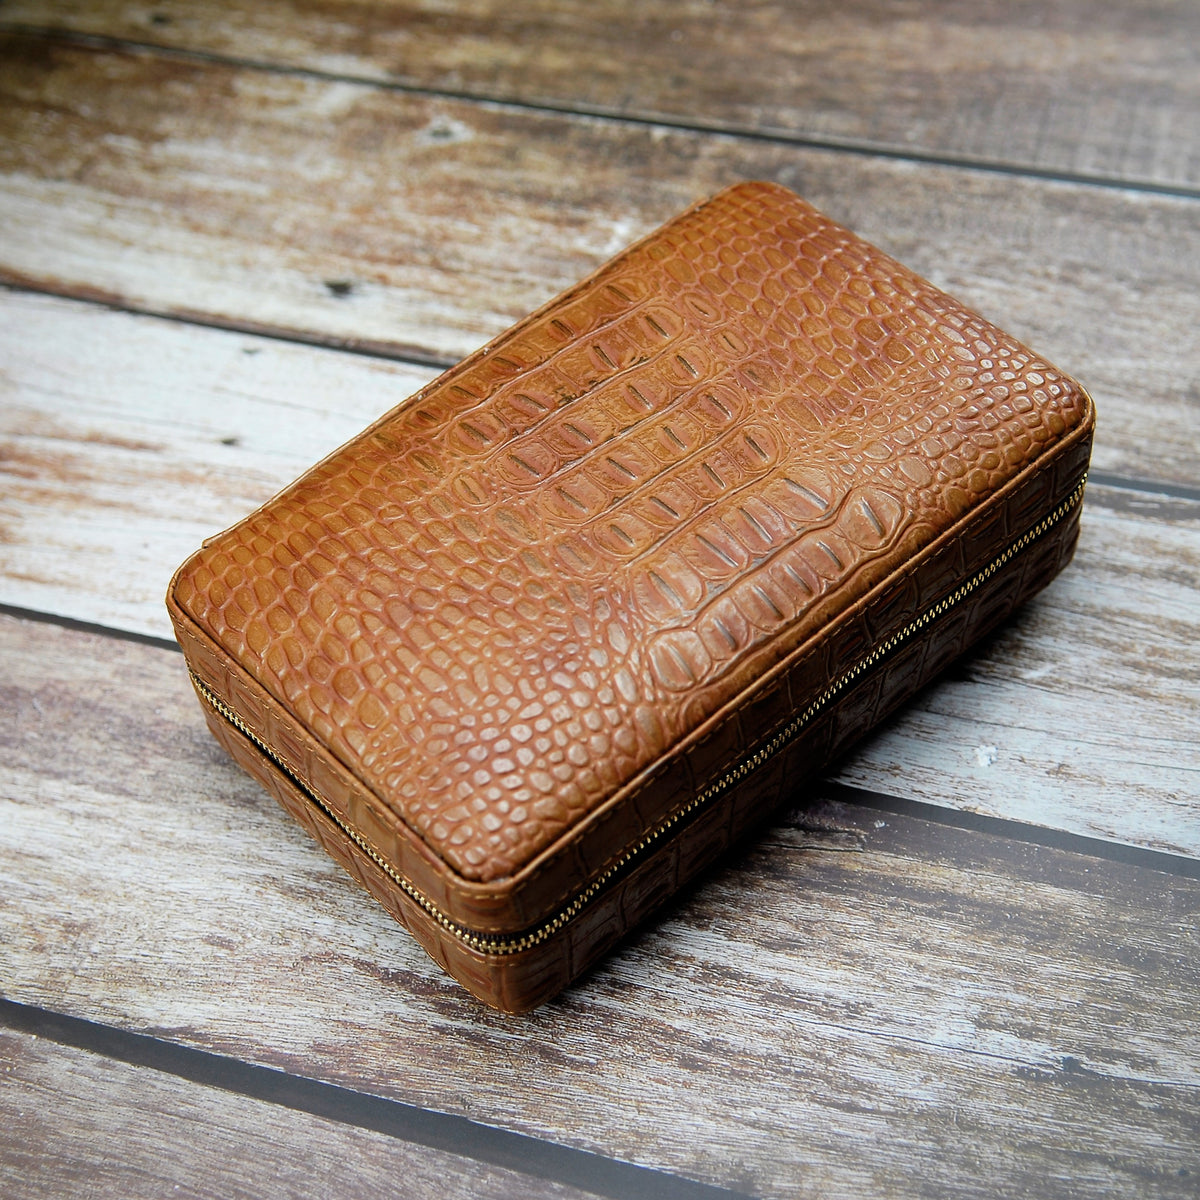 COLUMBUS Leather Cigarette Cigarillo Case with Cedar Wood Lining